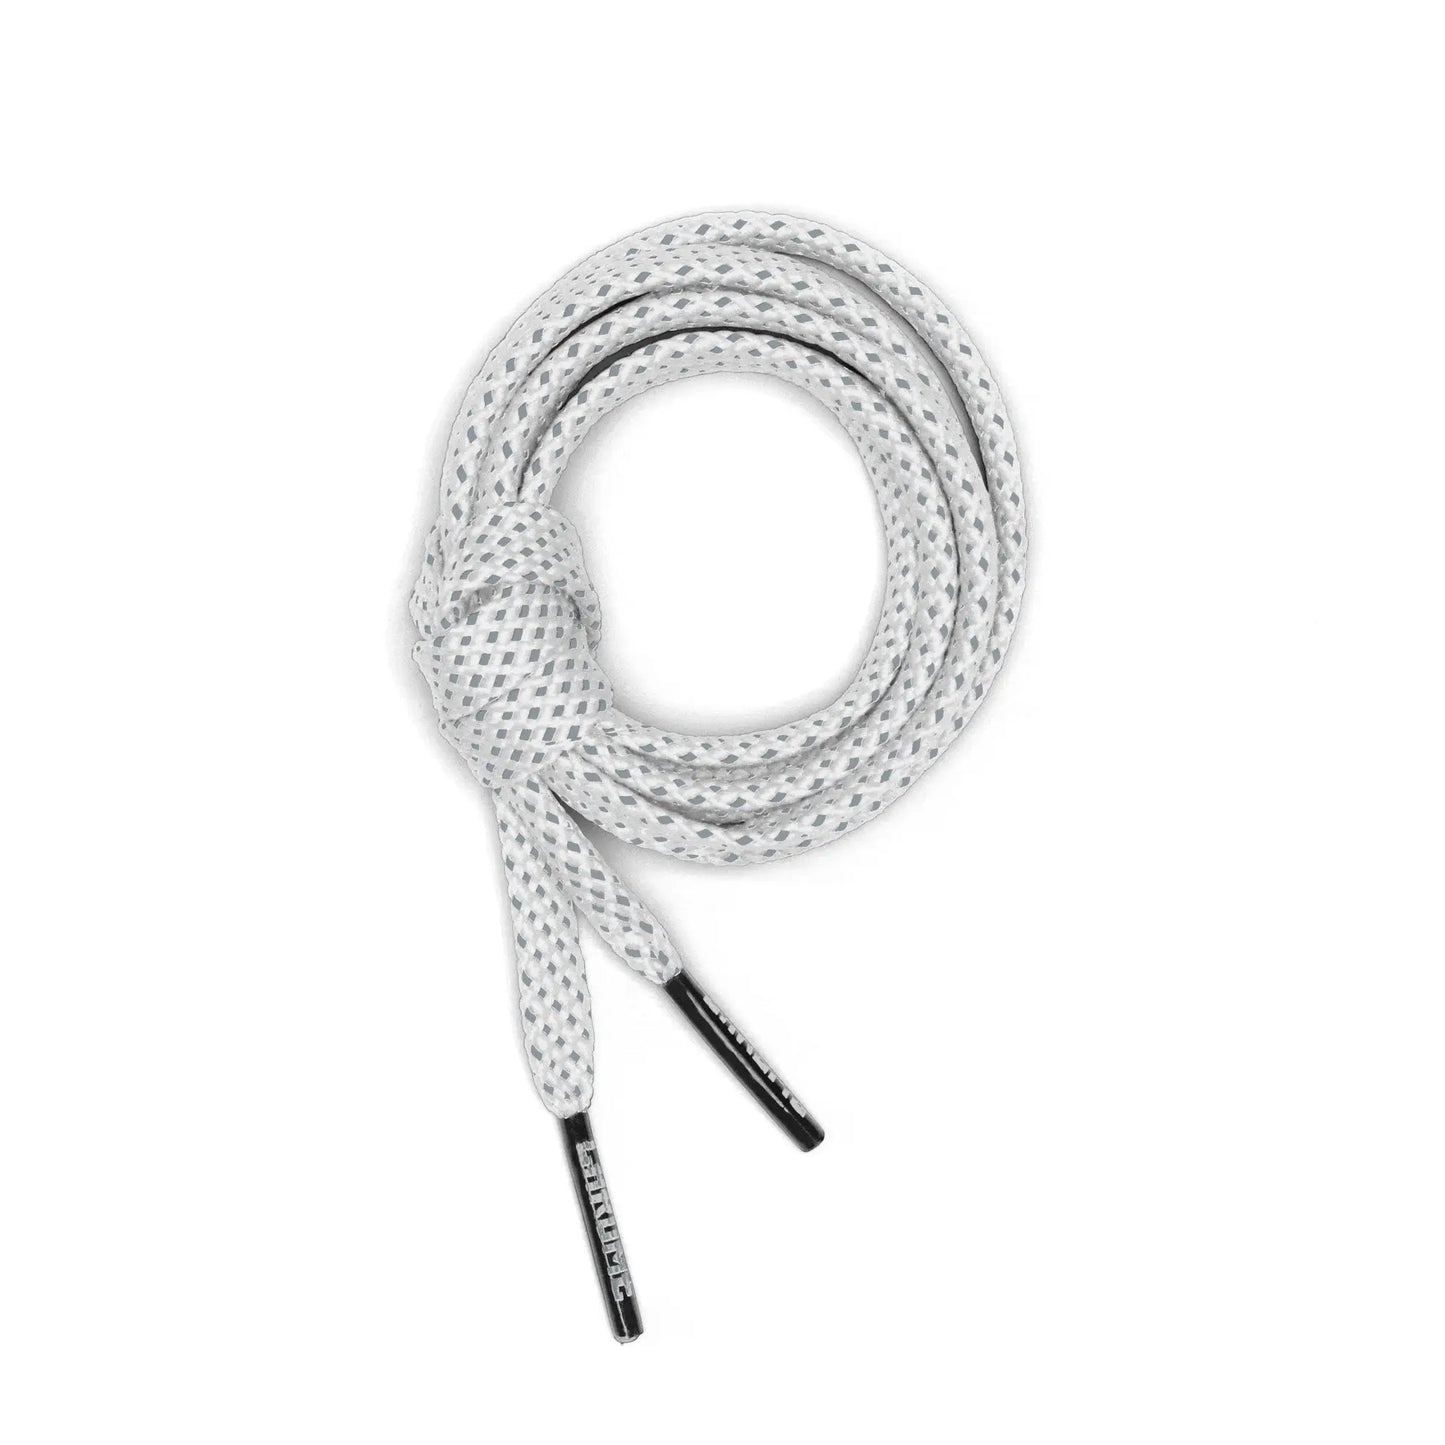 Chrome Industries Reflective Laces - White Reflective